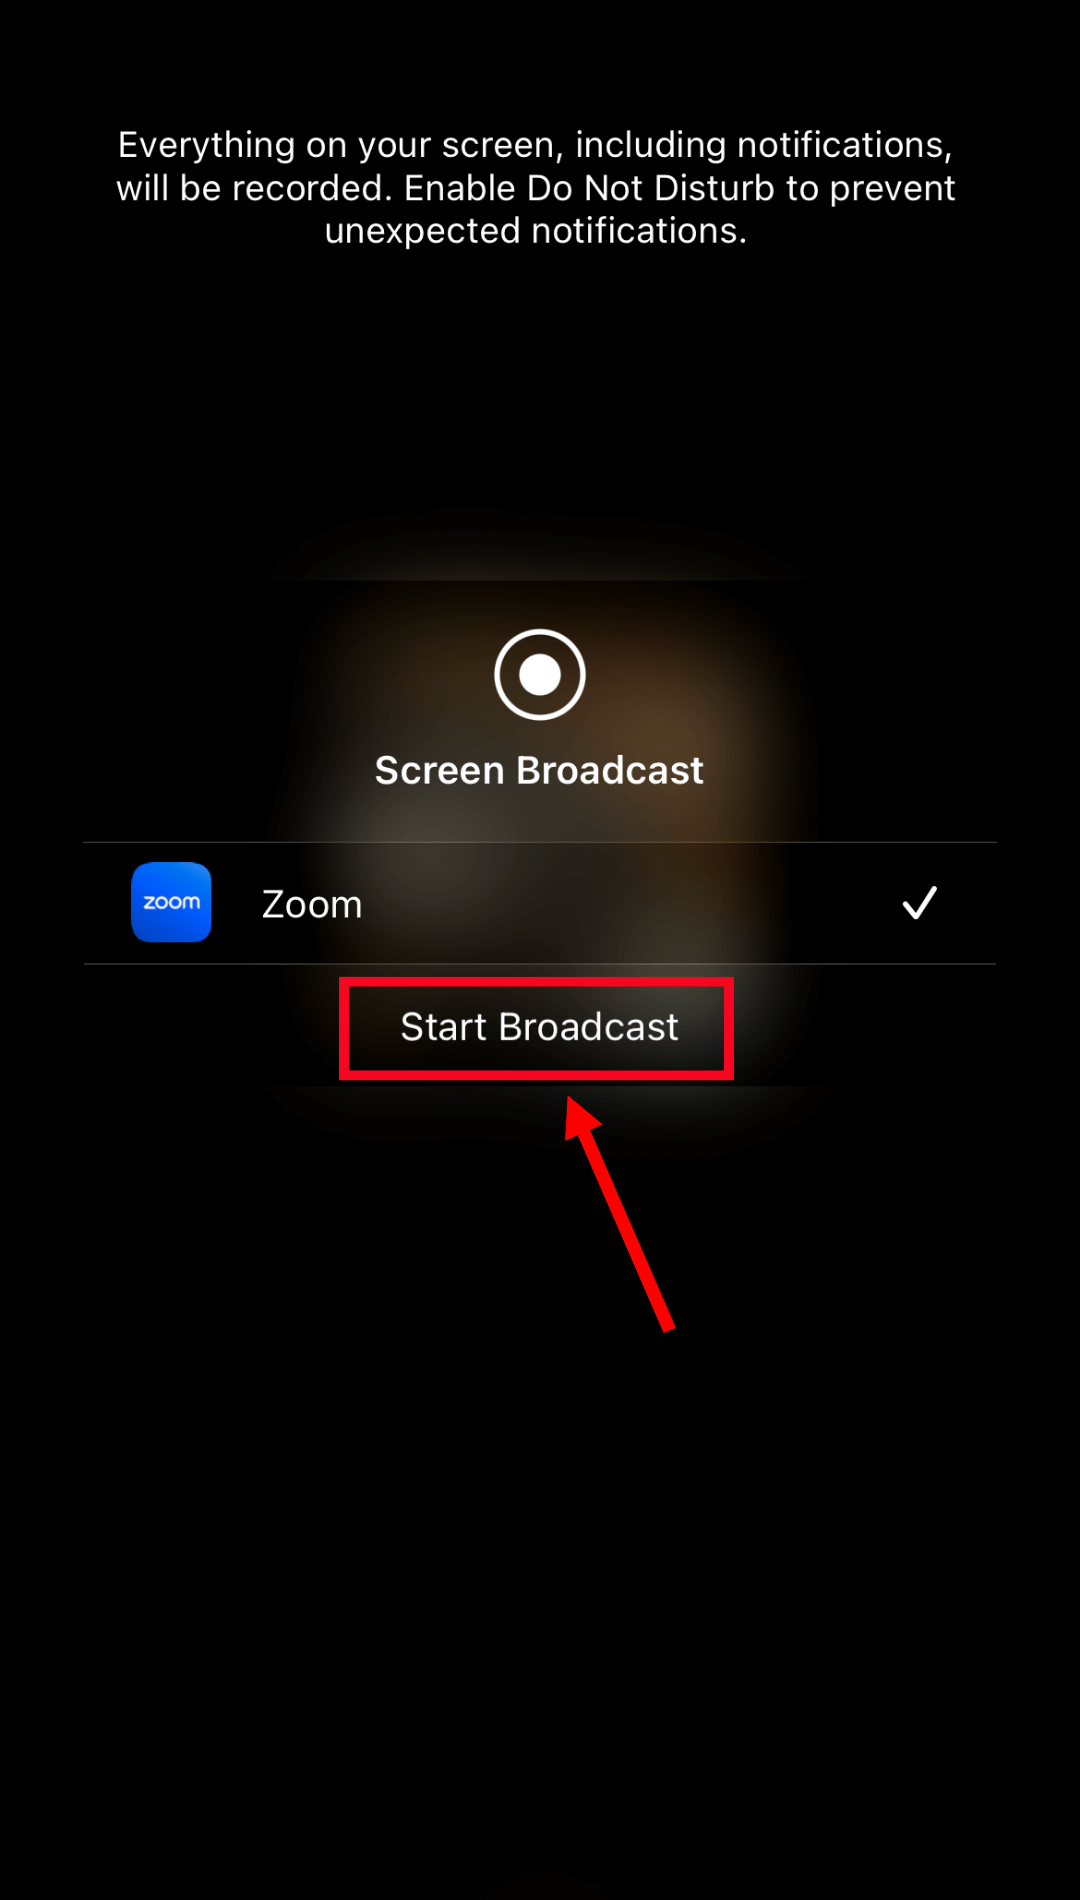 select start broadcast to share screen